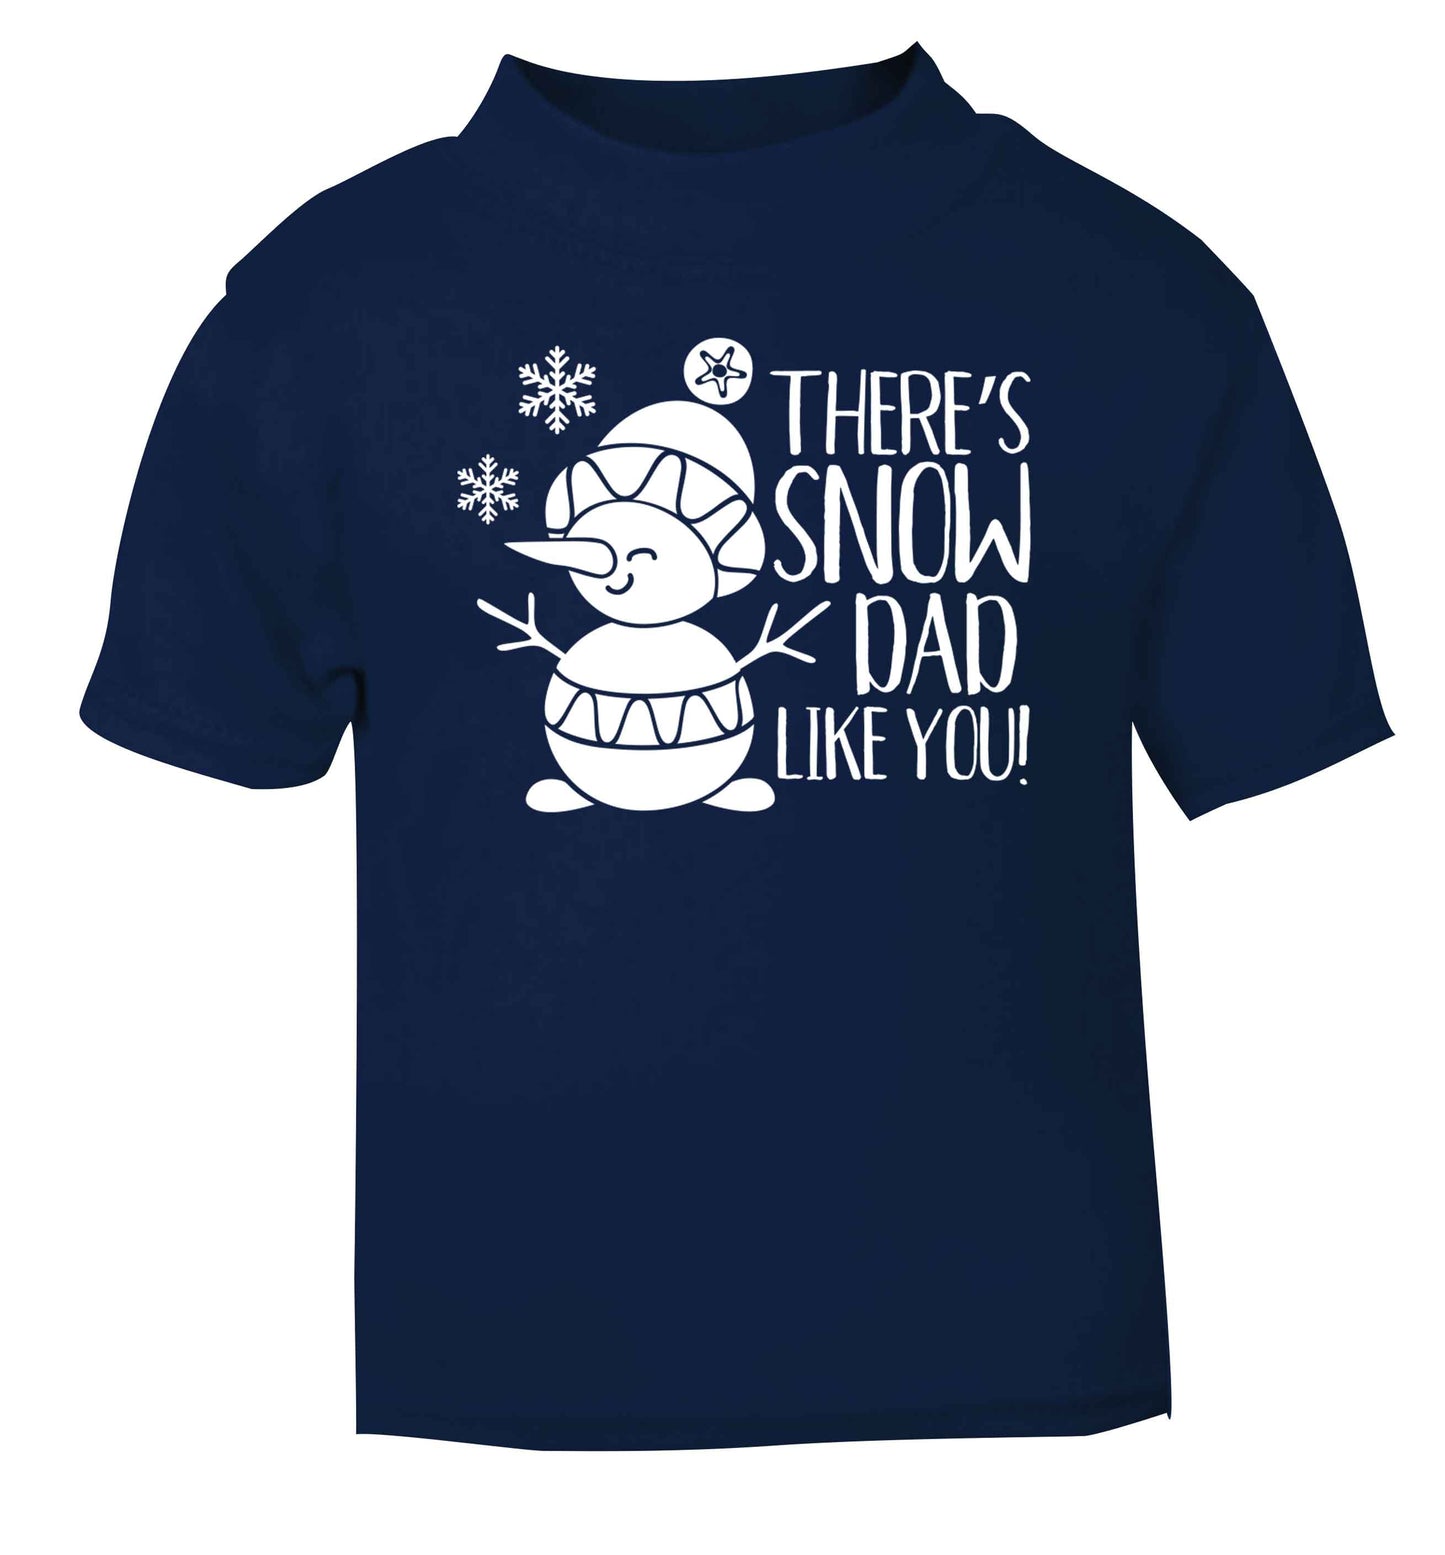 There's snow dad like you navy baby toddler Tshirt 2 Years